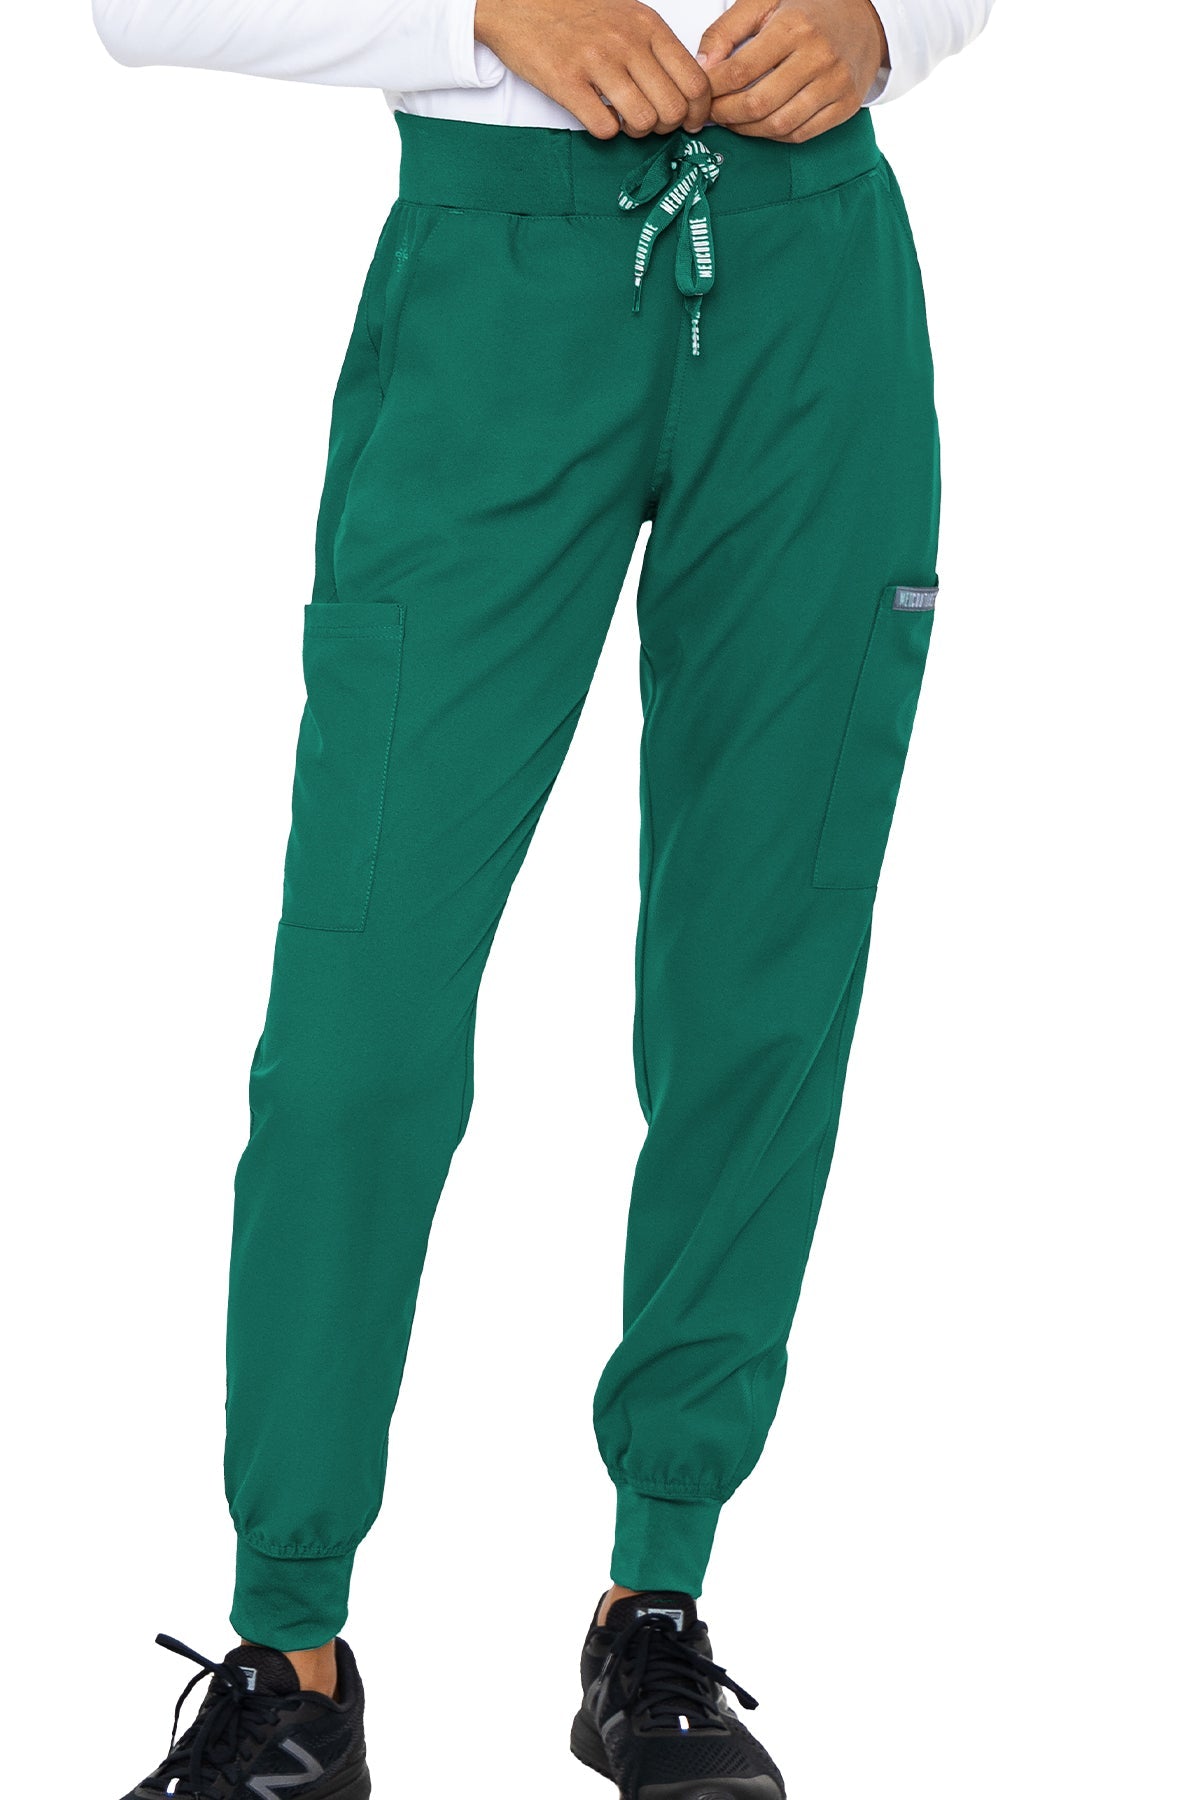 Med Couture Petite Scrub Pants Insight Jogger Pant in Hunter at Parker's Clothing and Shoes.